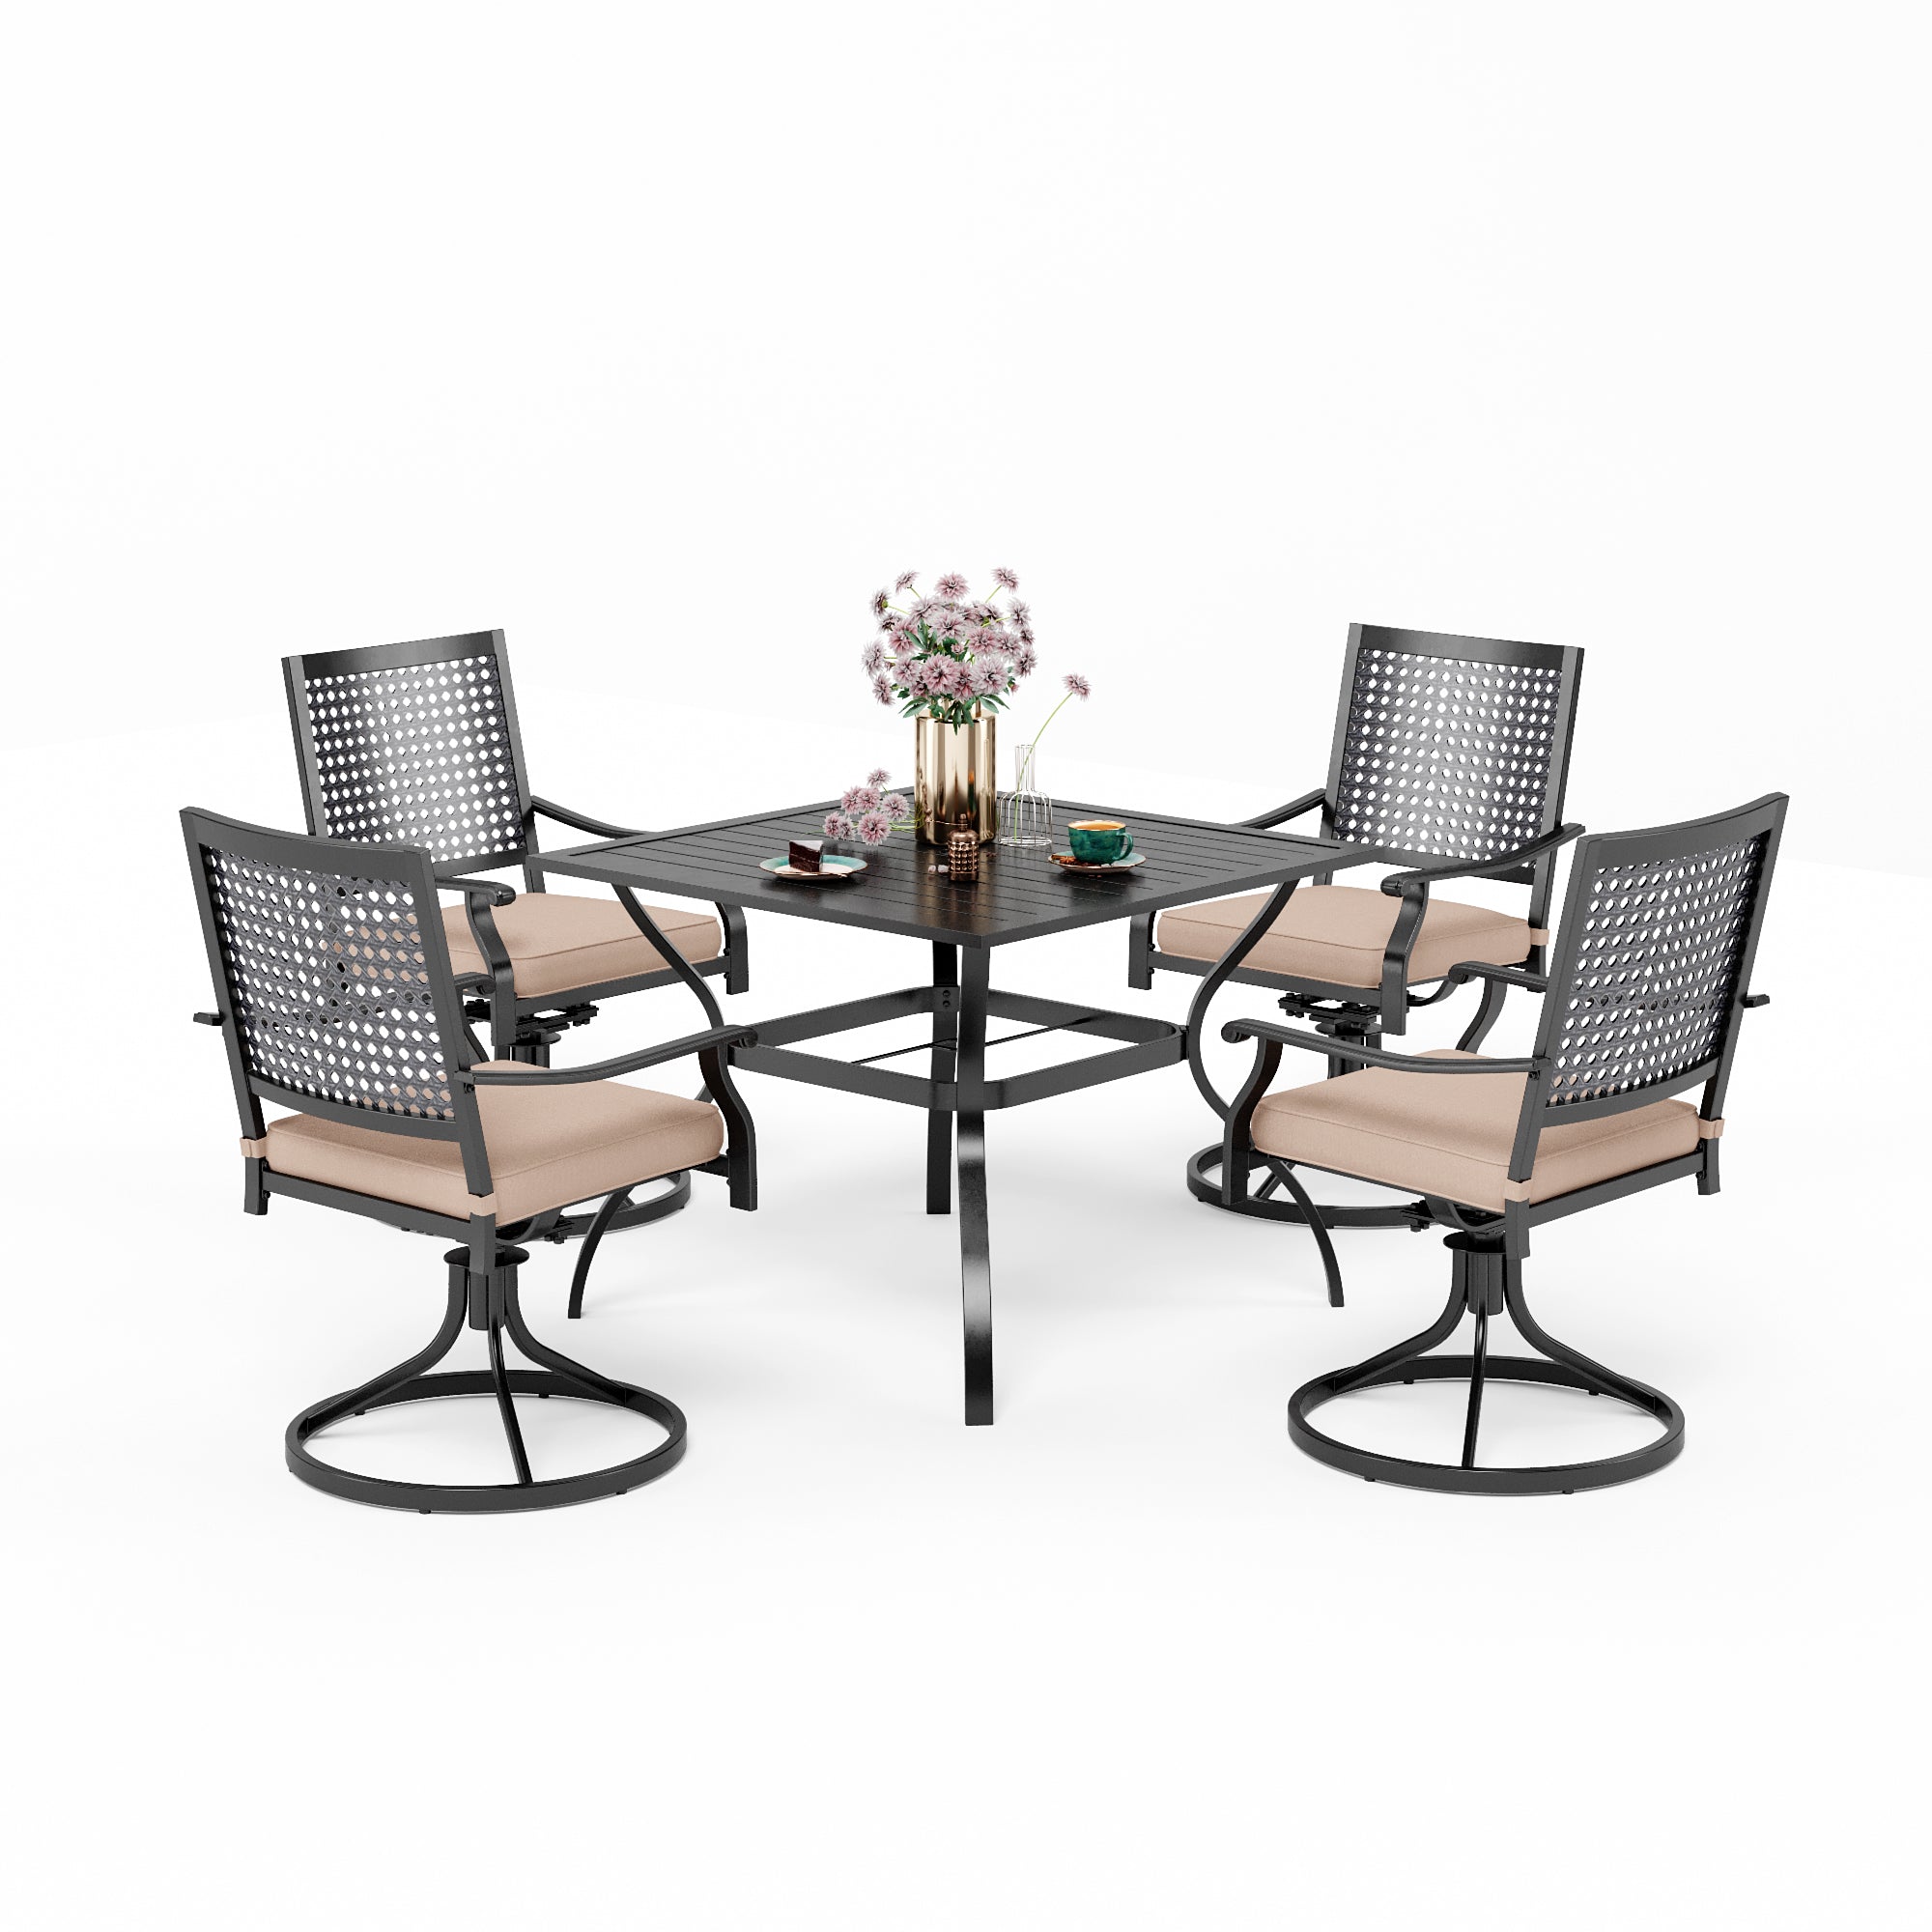 MFSTUDIO 5-Piece Outdoor Dining Set Steel Square Table & Bull's Eye Pattern Dining Chairs